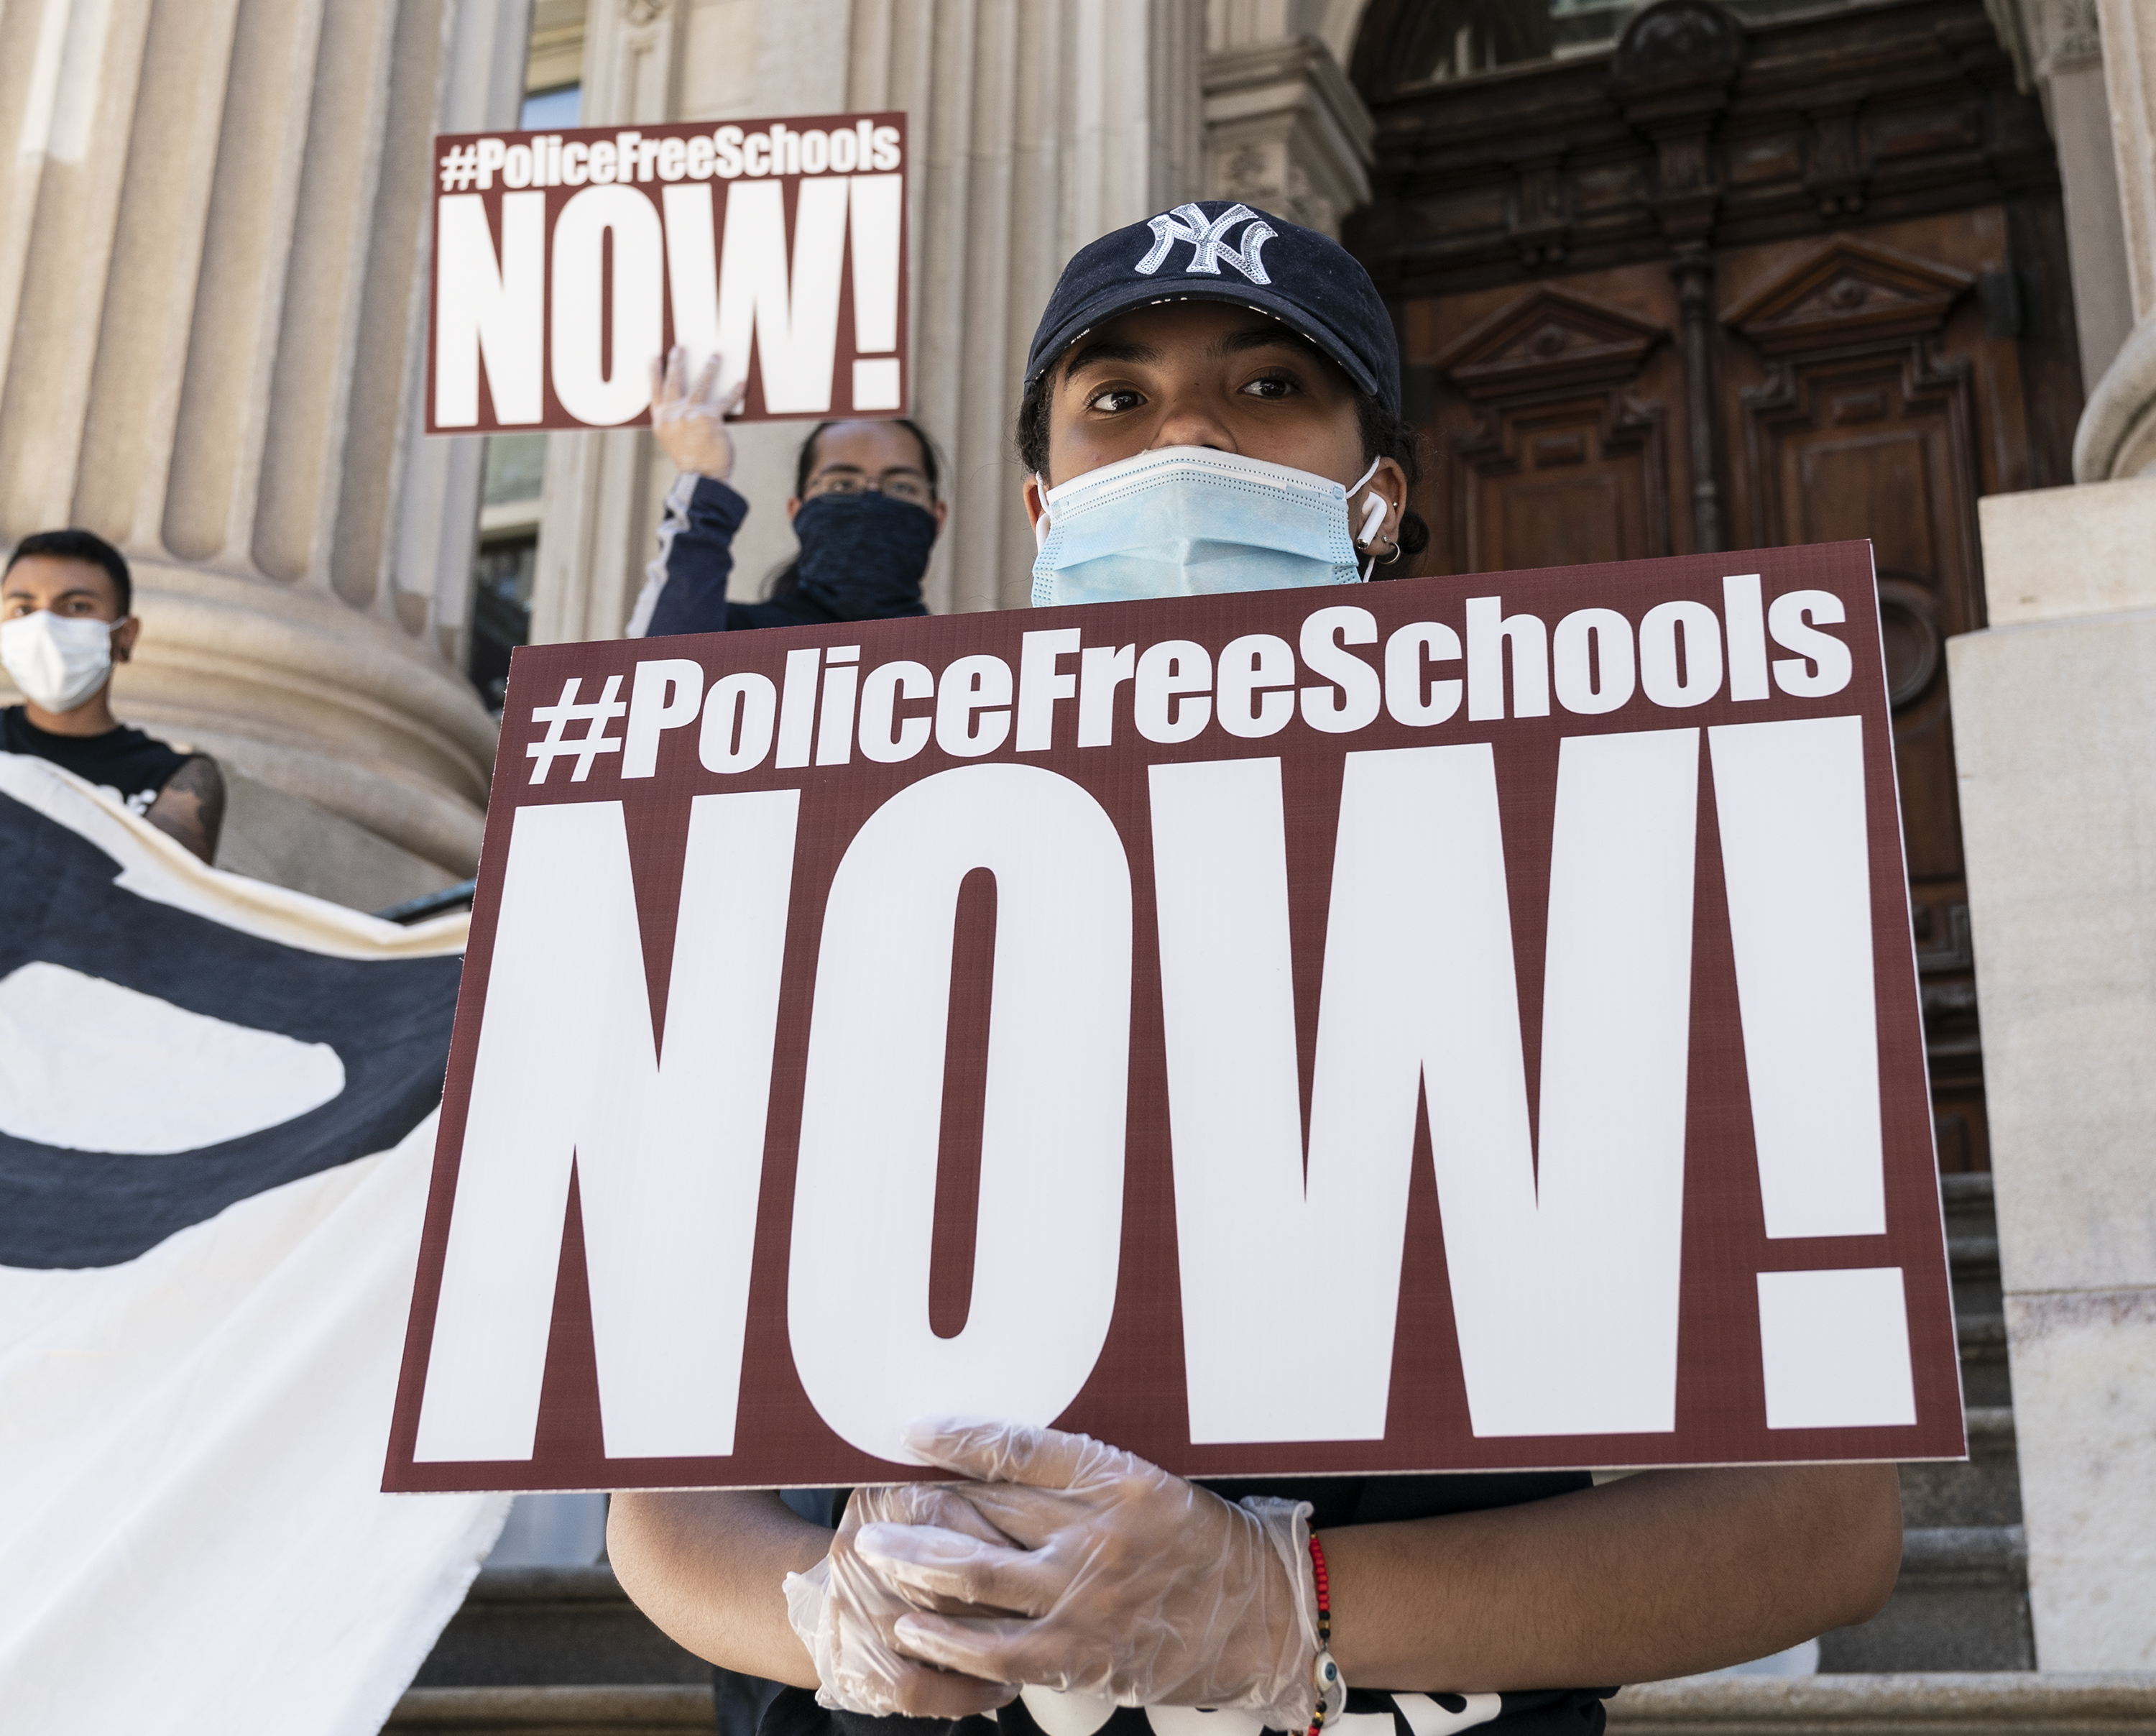 Students protesting police safety agents in NYC schools.